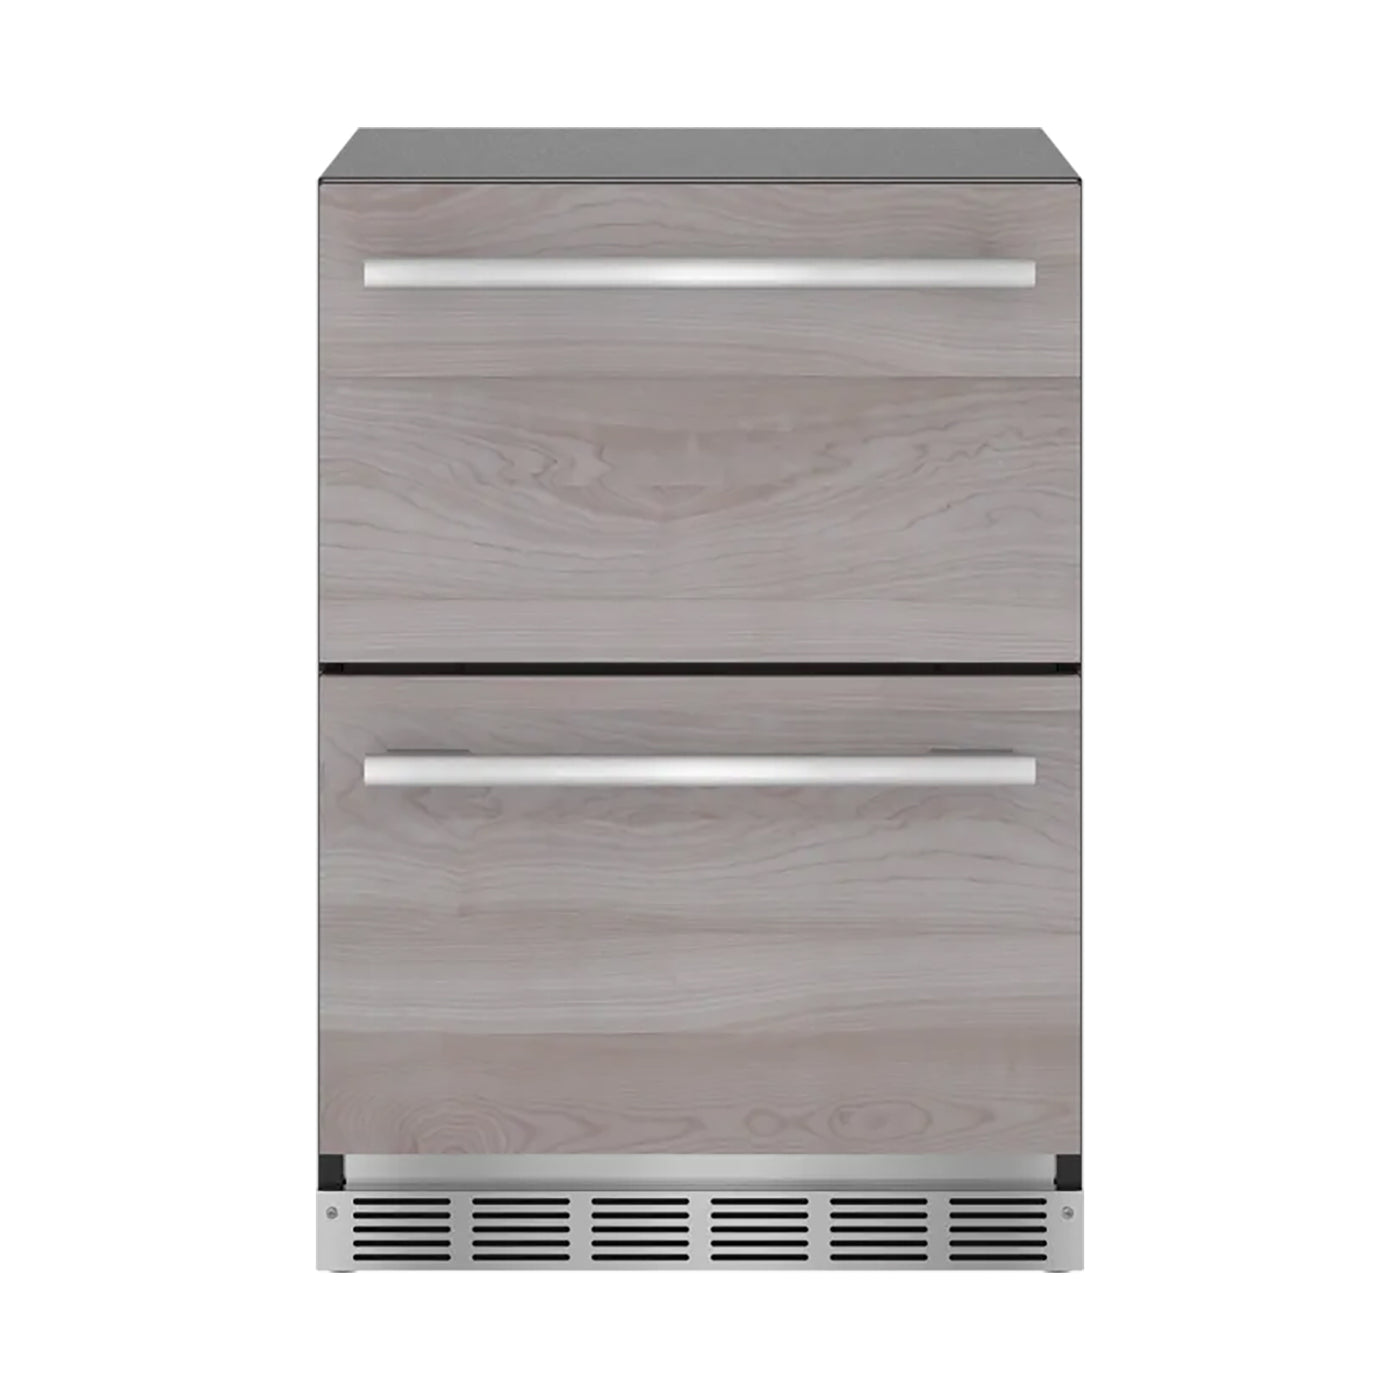 24" Freedom® Under Counter Double Drawer Refrigerator